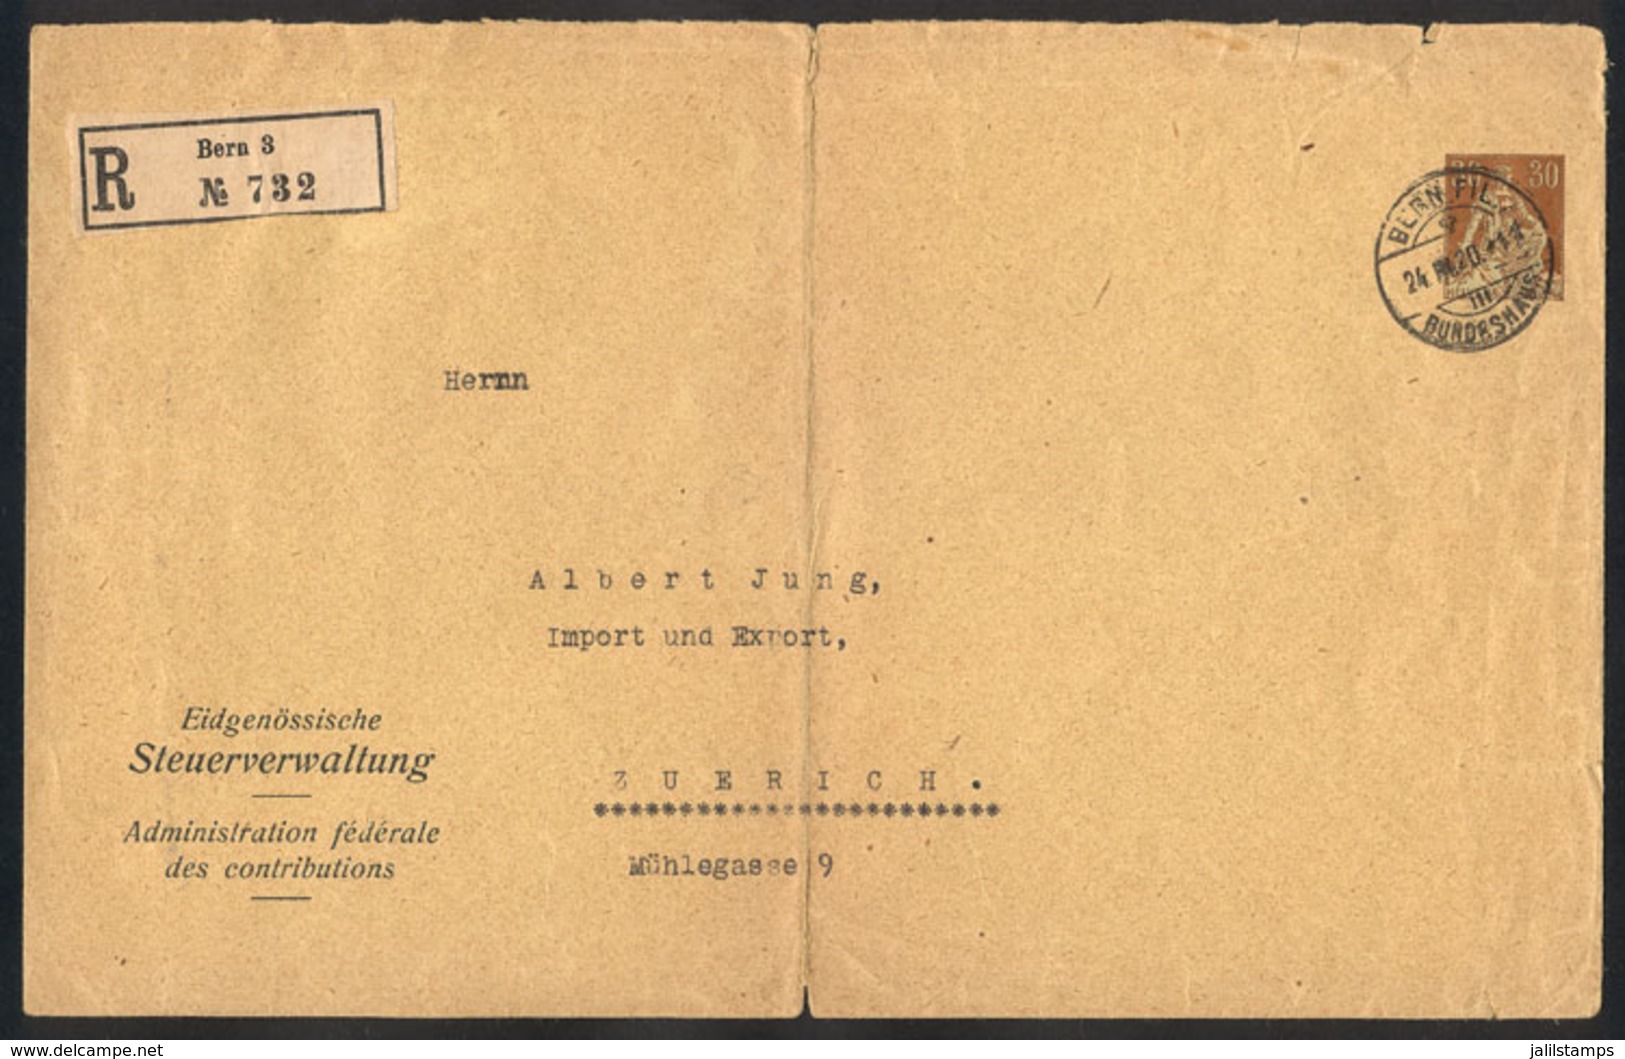 SWITZERLAND: 30c. Stationery Envelope Sent By Registered Mail From Bern To Zürich On 24/MAR/1920, Vertical Central Creas - ...-1845 Prephilately